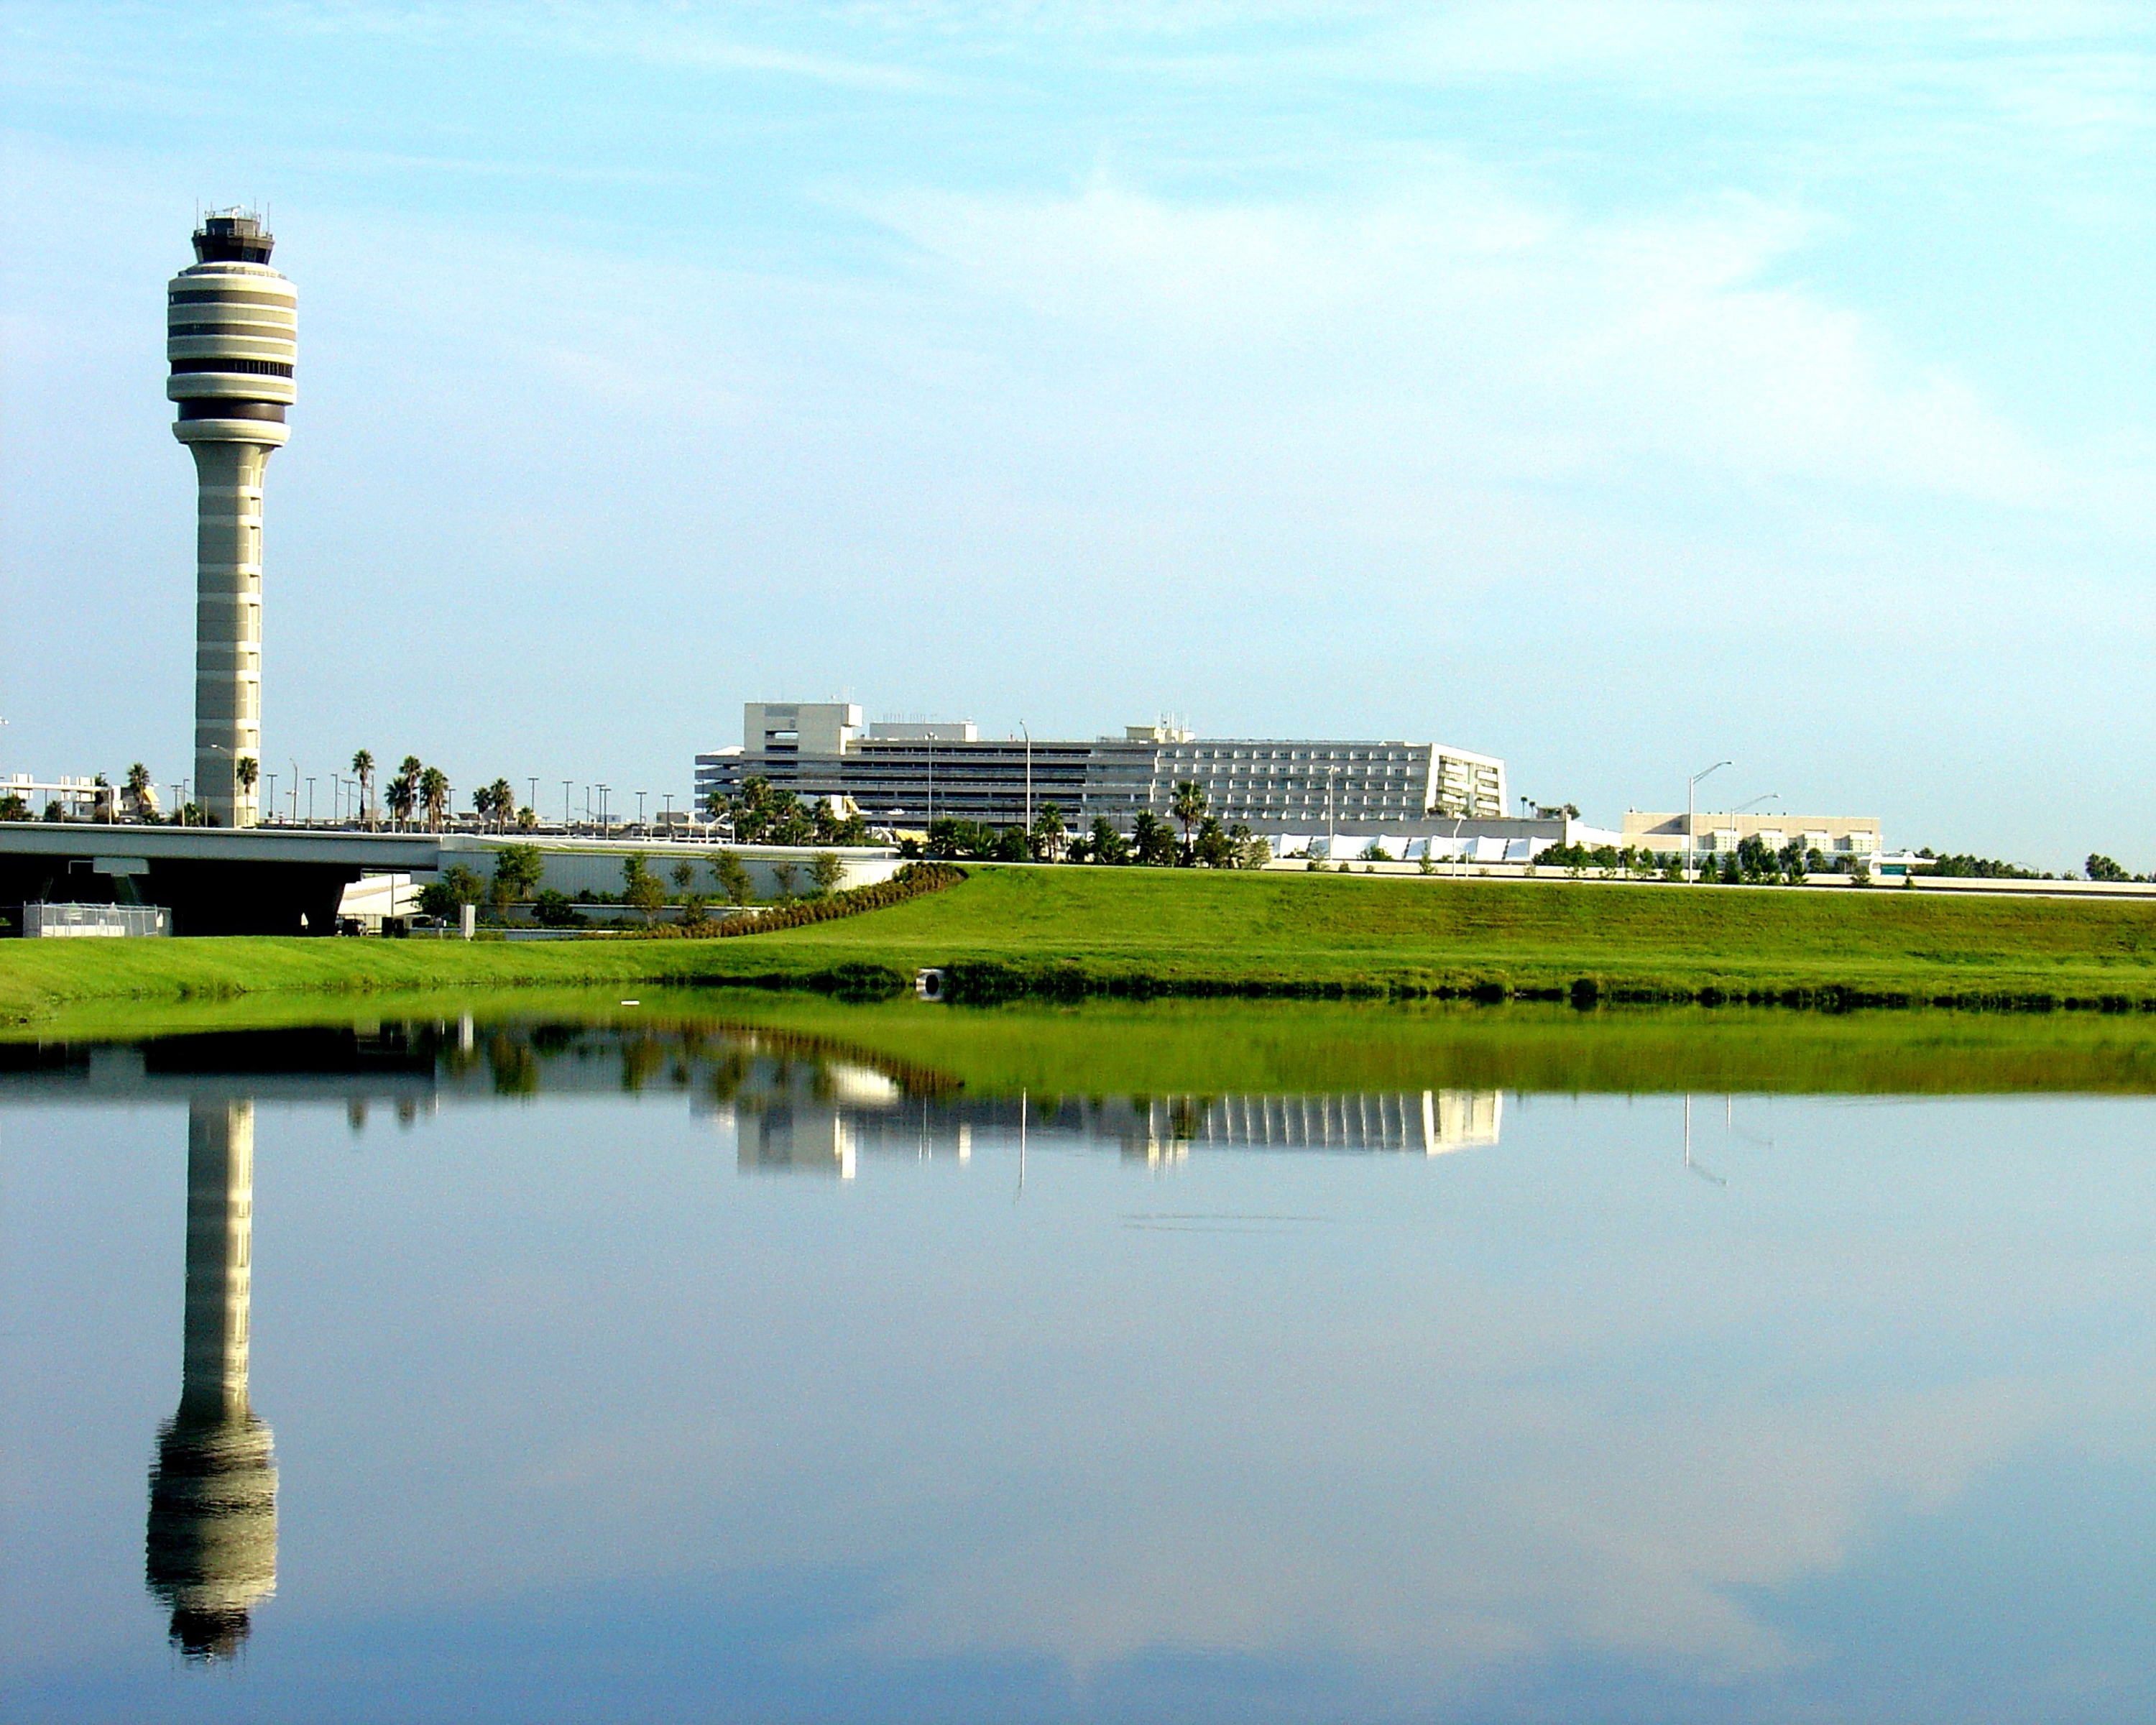 South Side of Terminal Reflected